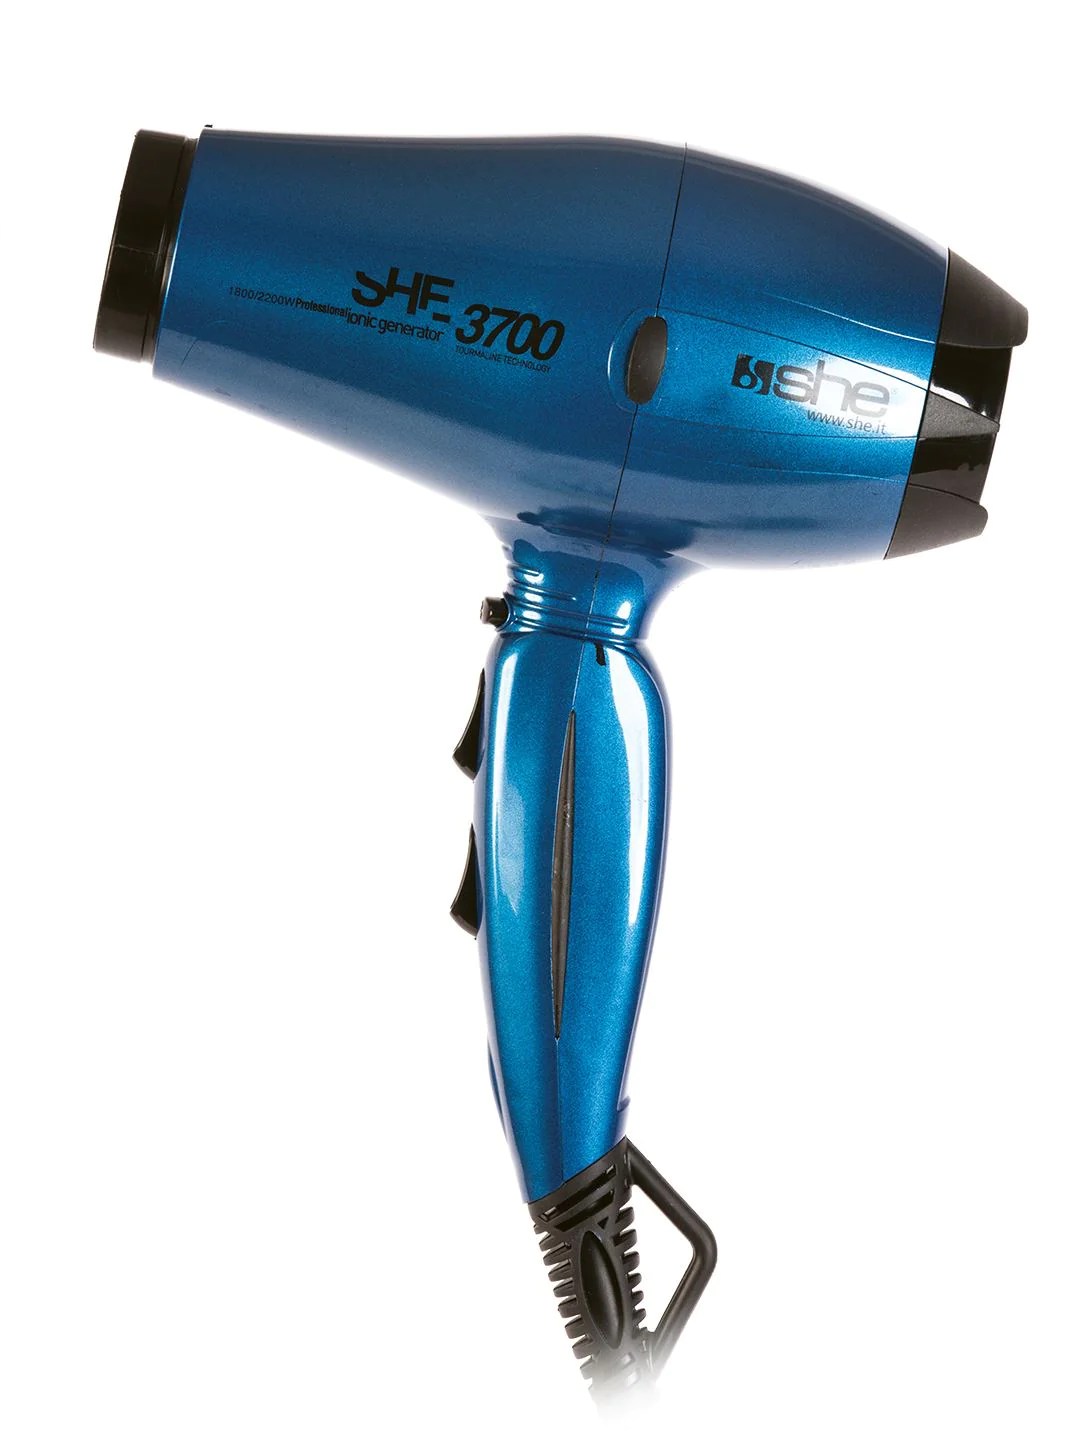 

She is a professional blue compact 3700 Ionic 2200 W hair dryer.